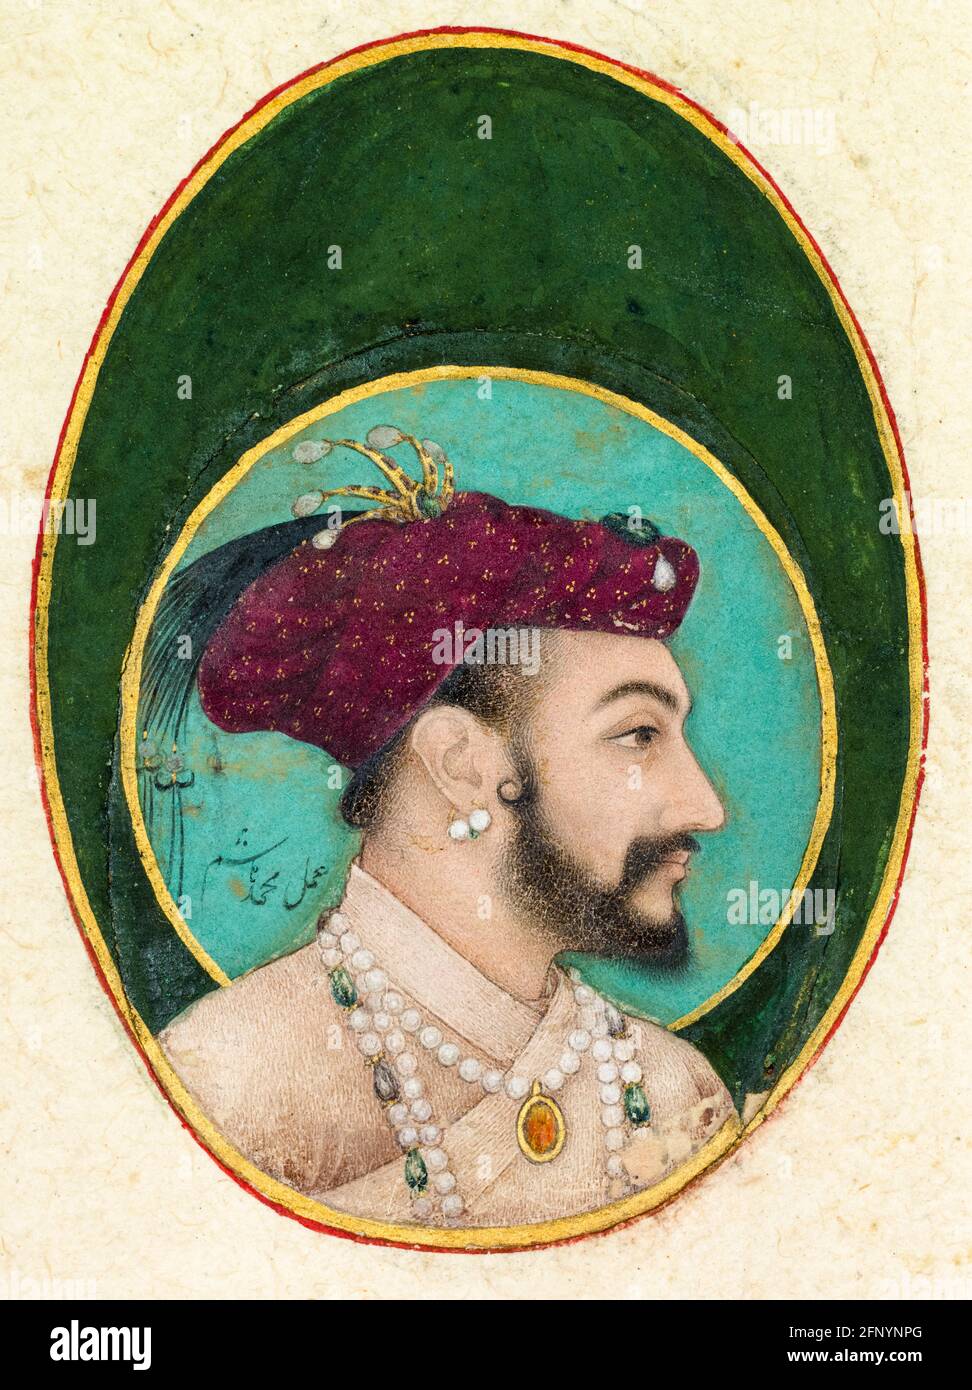 Emperor Shah Jahan (1592-1666), 5th Mughal Emperor, portrait painting by Hashim, circa 1630 Stock Photo